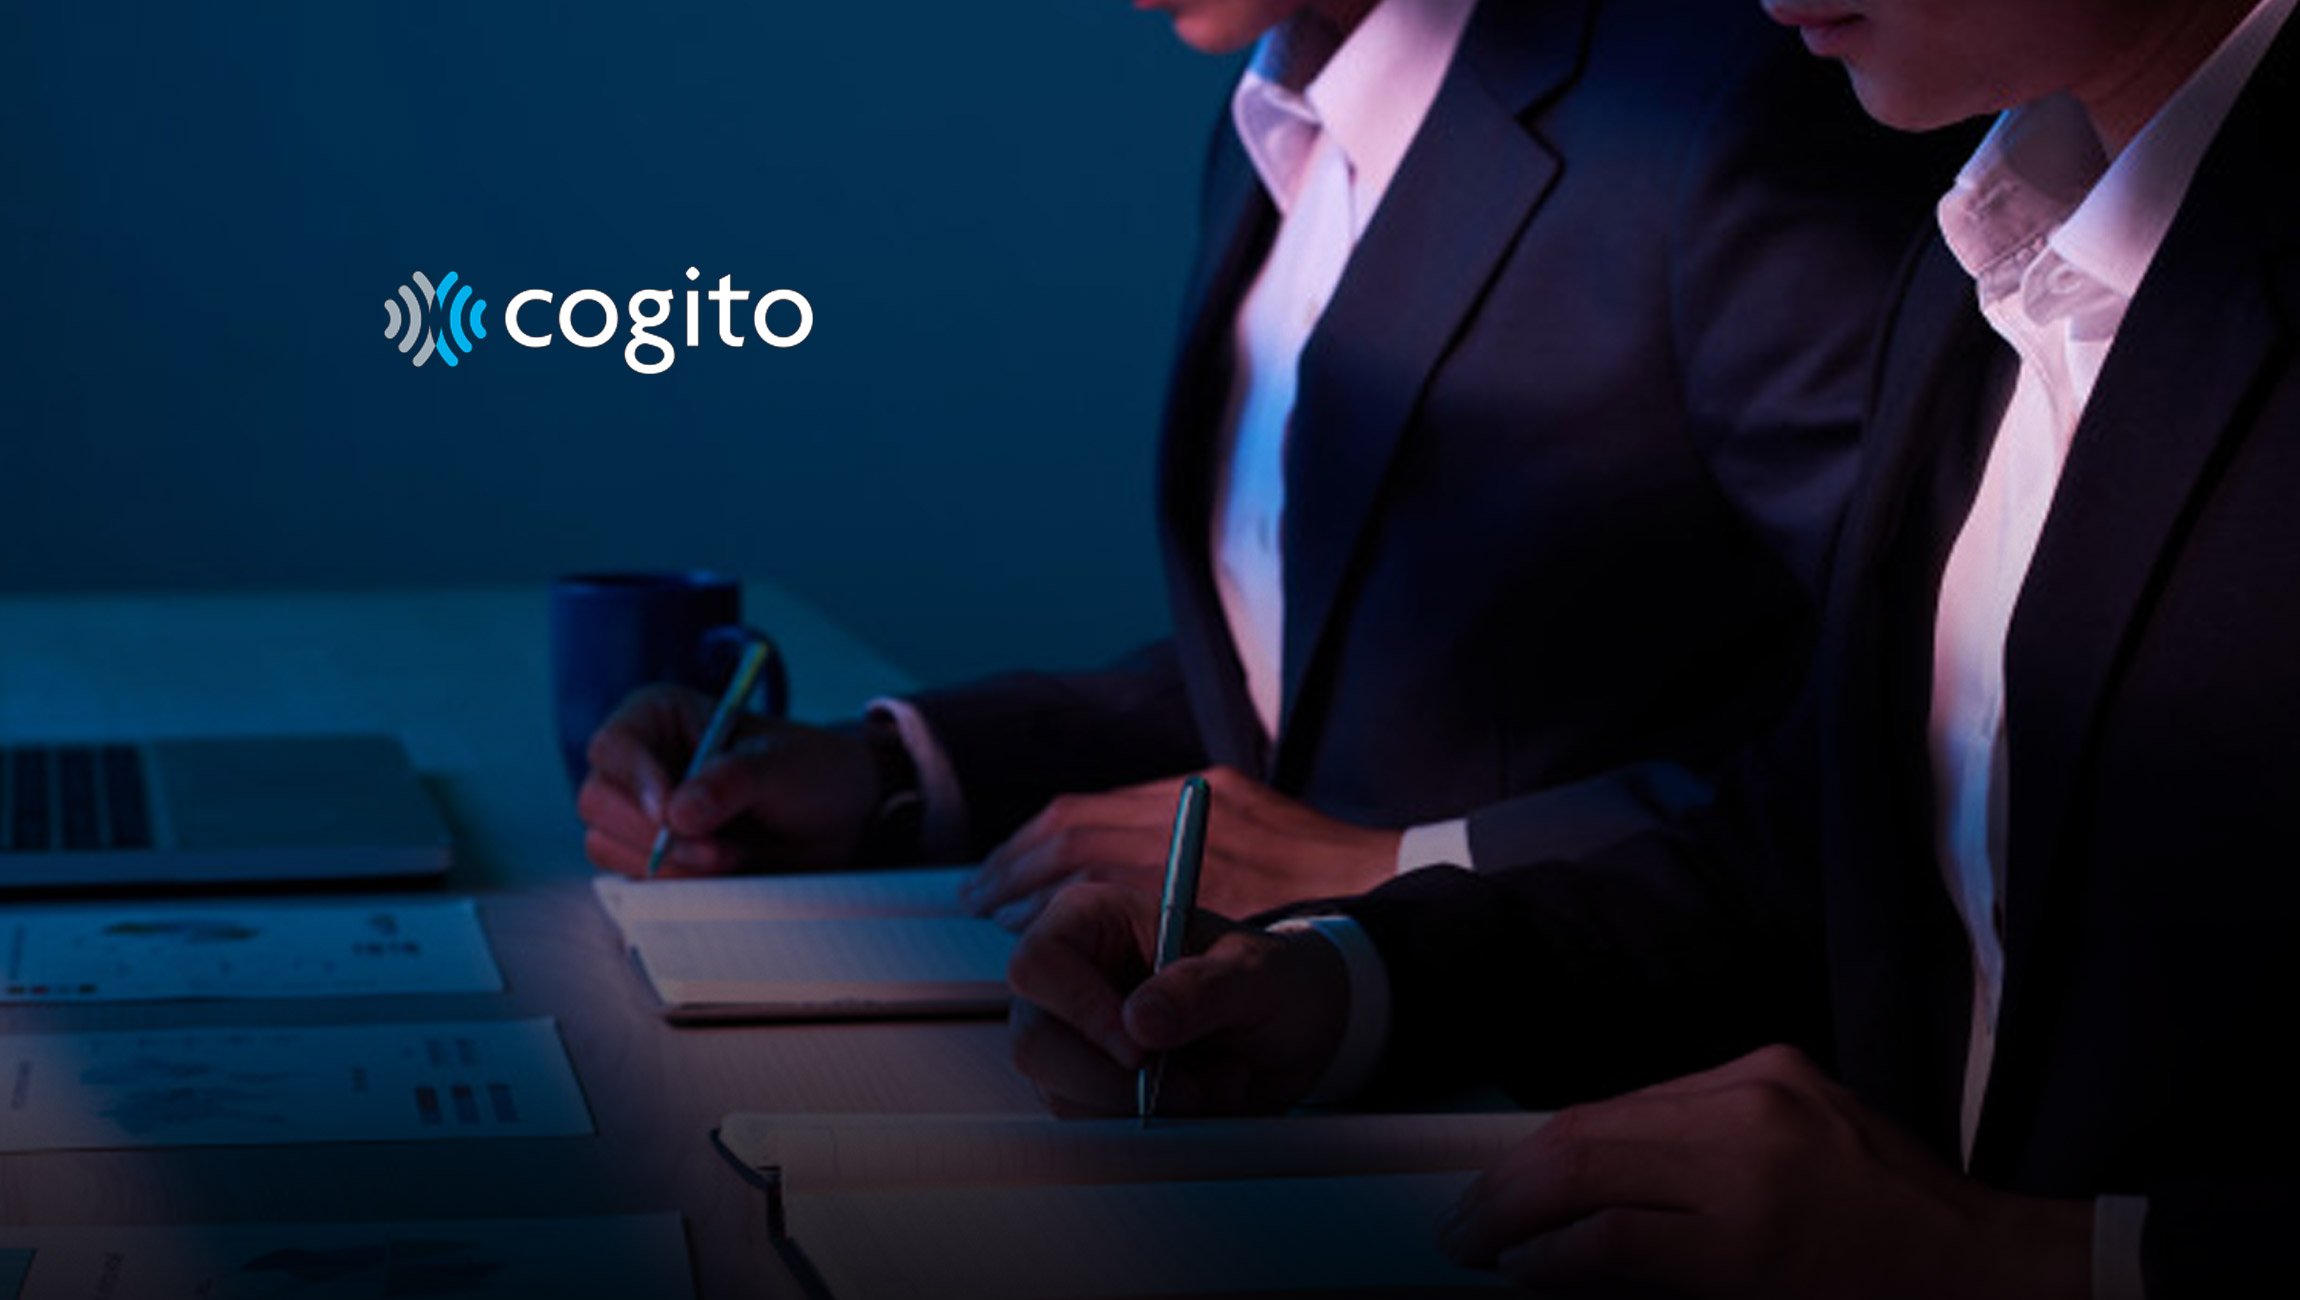 Cogito Secures $25 Million in Funding to Expand its AI Coaching System to More Enterprises